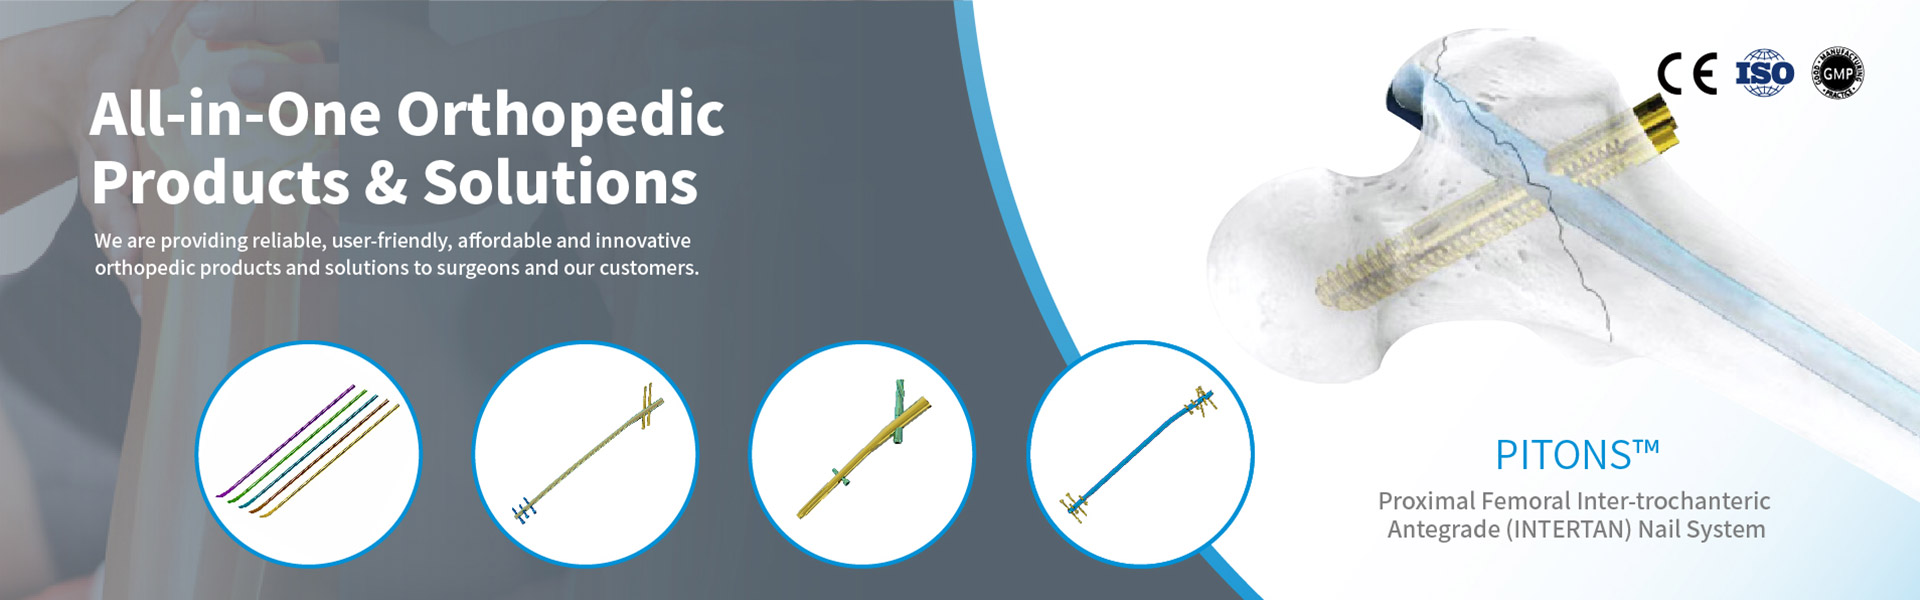 all in one orthopedic products & solutions